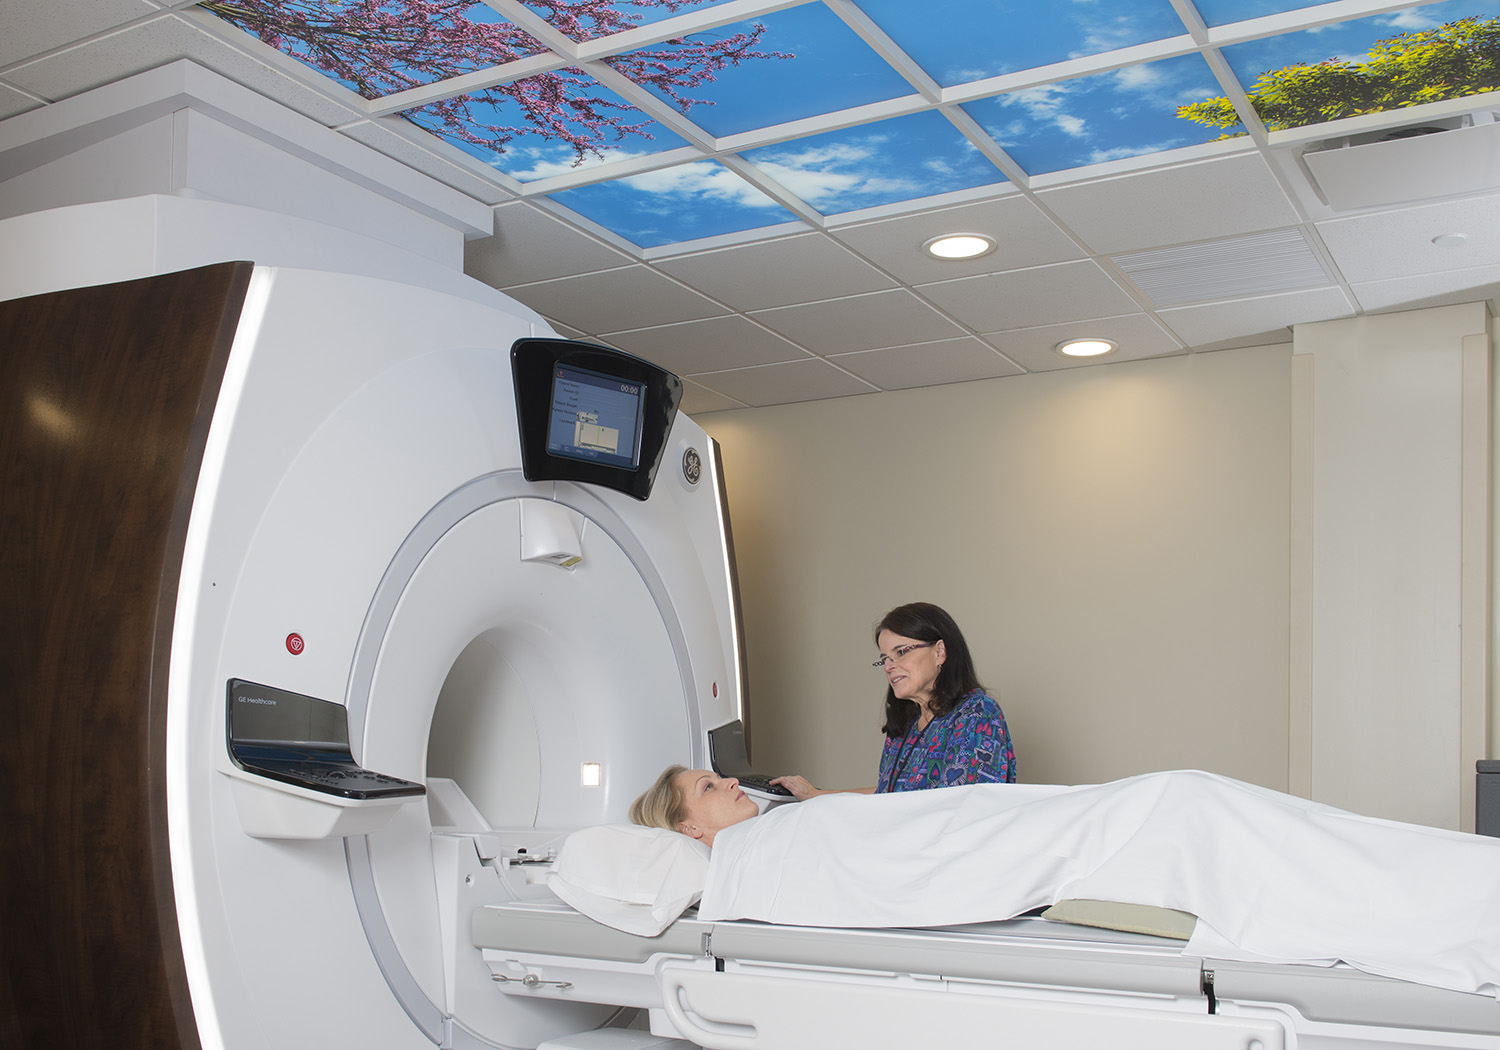 MRI scan is shown with a patient and technician